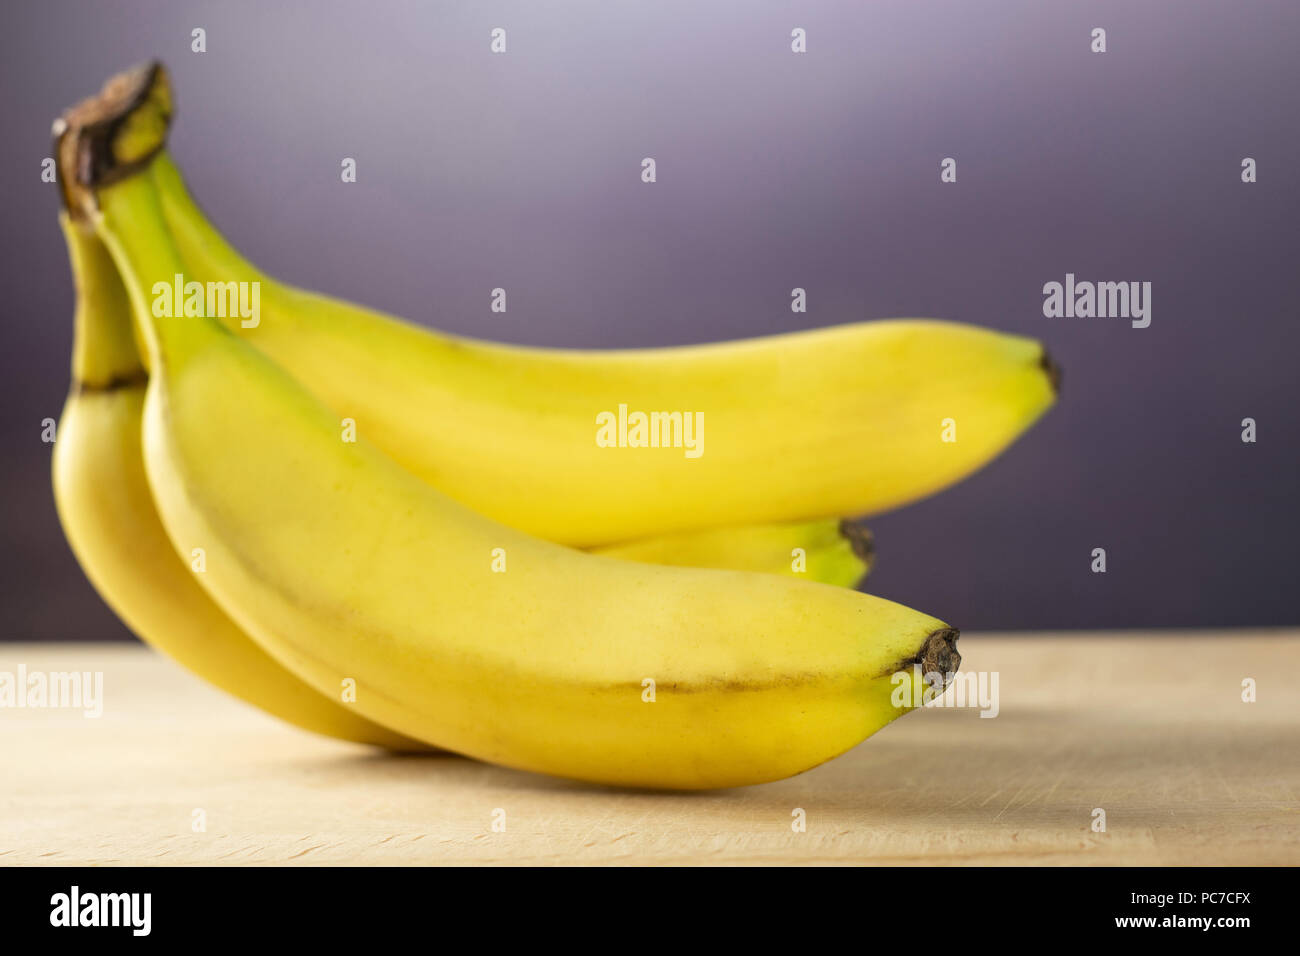 Group of five whole fresh yellow banana one cluster with grey gradient behind Stock Photo